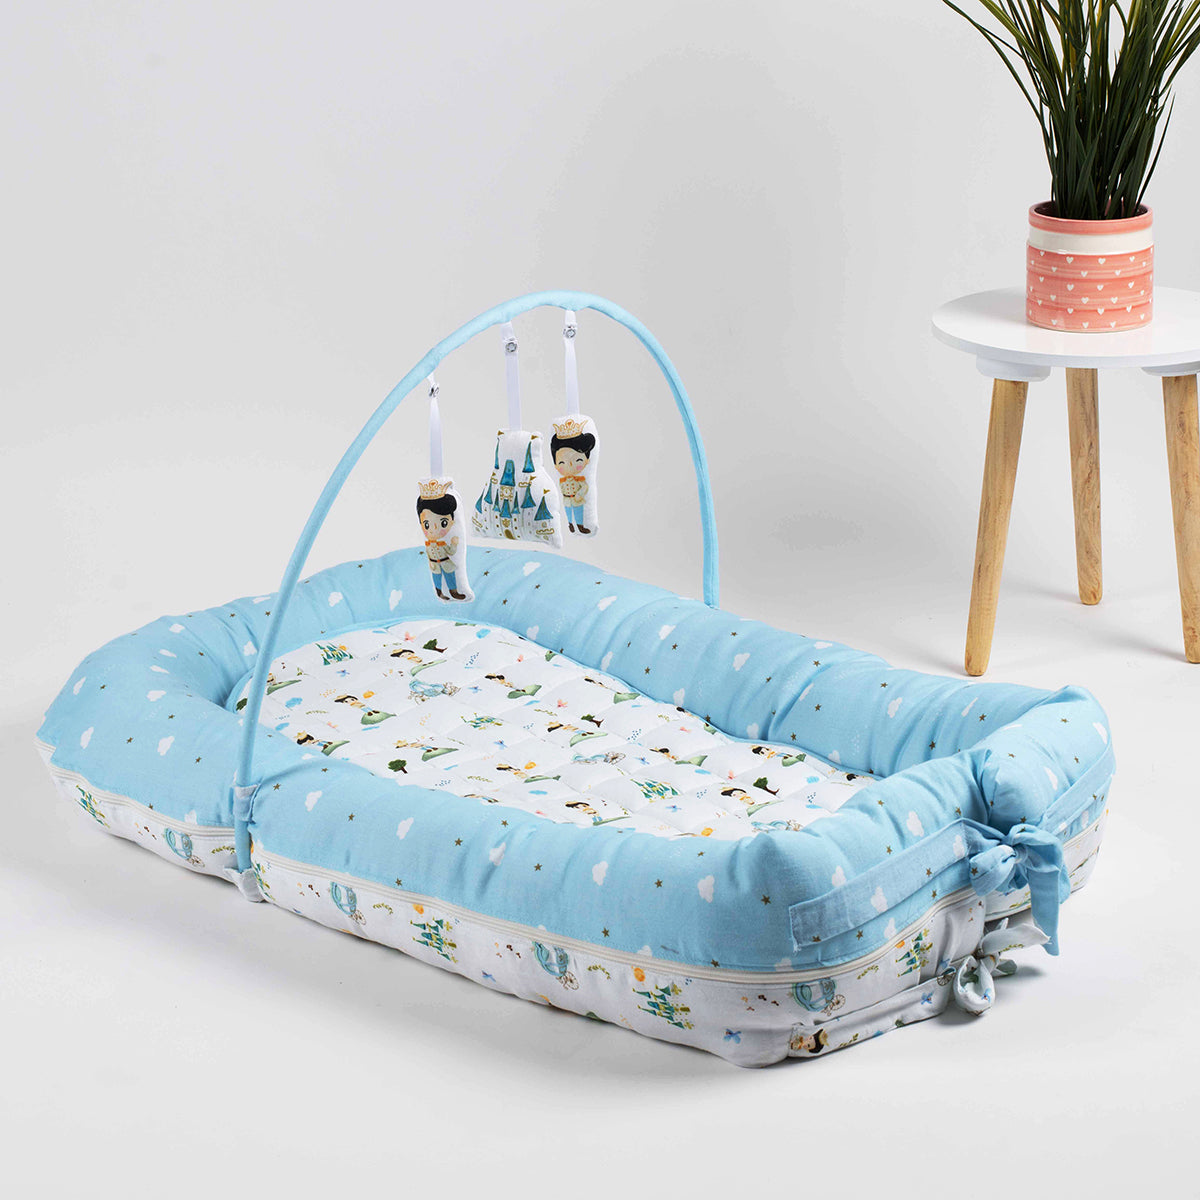 Tiny snooze reversible baby nest- the little prince